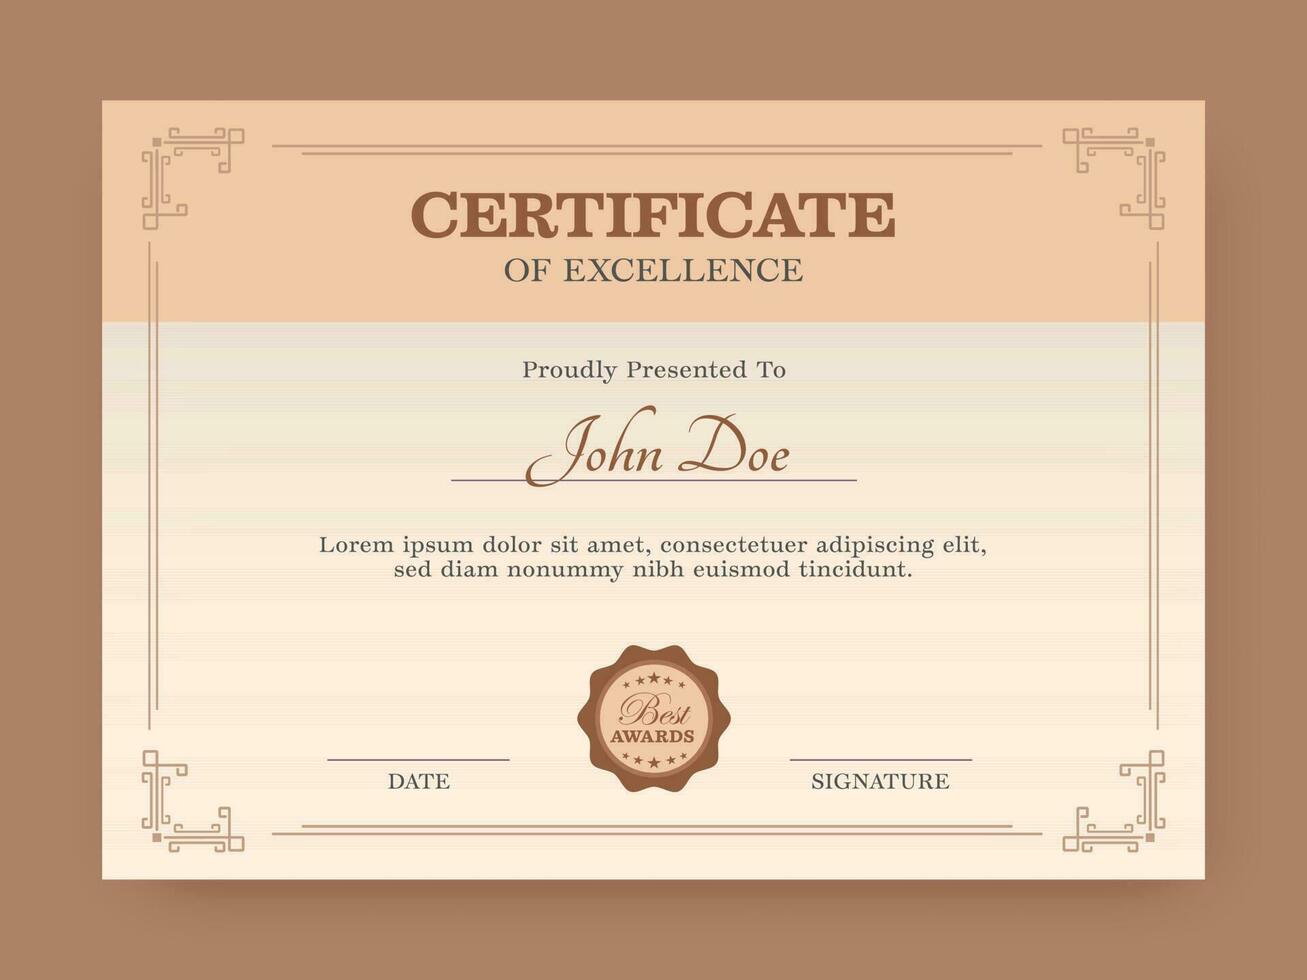 Certificate Of Excellence Template Design For Printable. vector